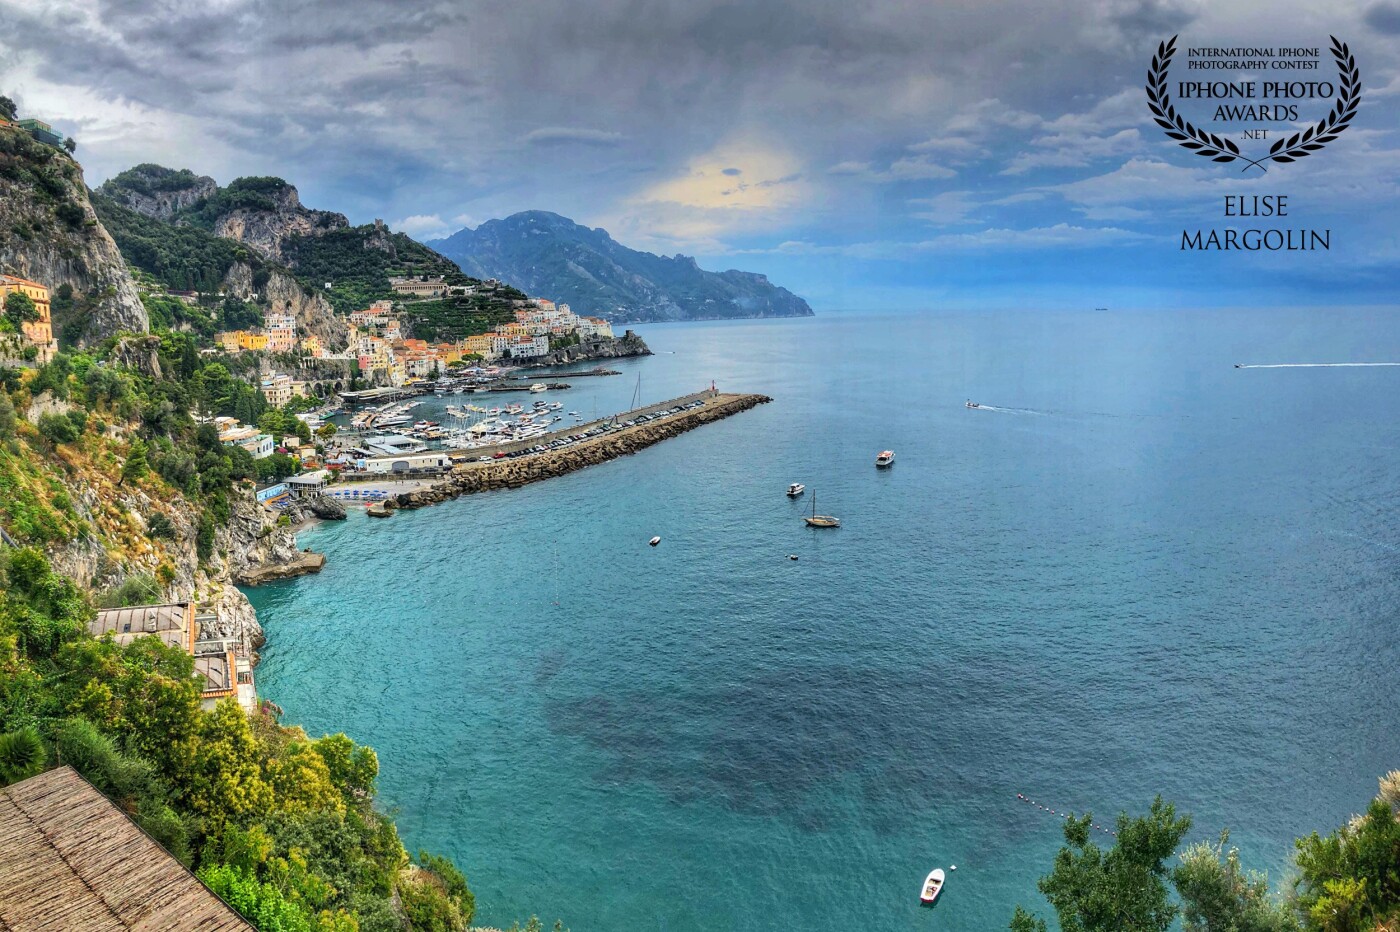 There are not many places as breathtaking as the Amalfi Coast in Southern Italy. The colors, the people, the culture, the food... this was one place that was very hard to leave! 